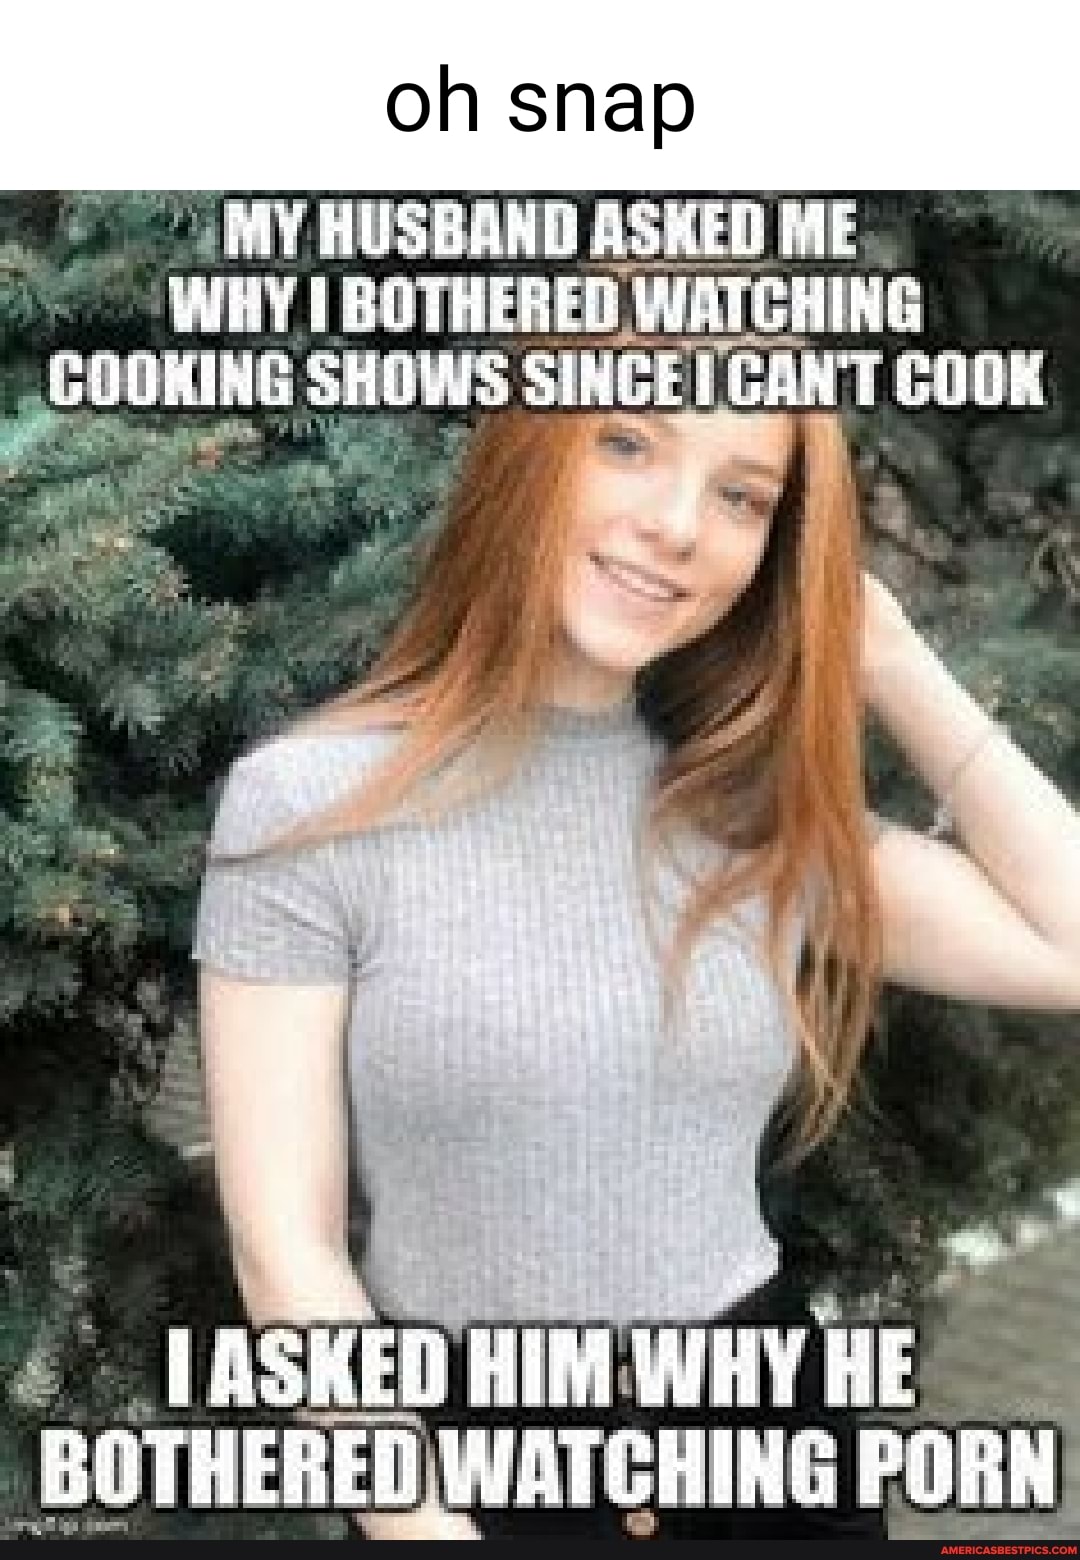 Husband Watches Porn Meme - Oh snap MY HUSBAND ASKED ME WHY I BOTHERED WATCI CHING COOKING SINCEICA  CANT COOK ASKED HIM: WHY HE. BOTHERED WATCHING PORN - America's best pics  and videos